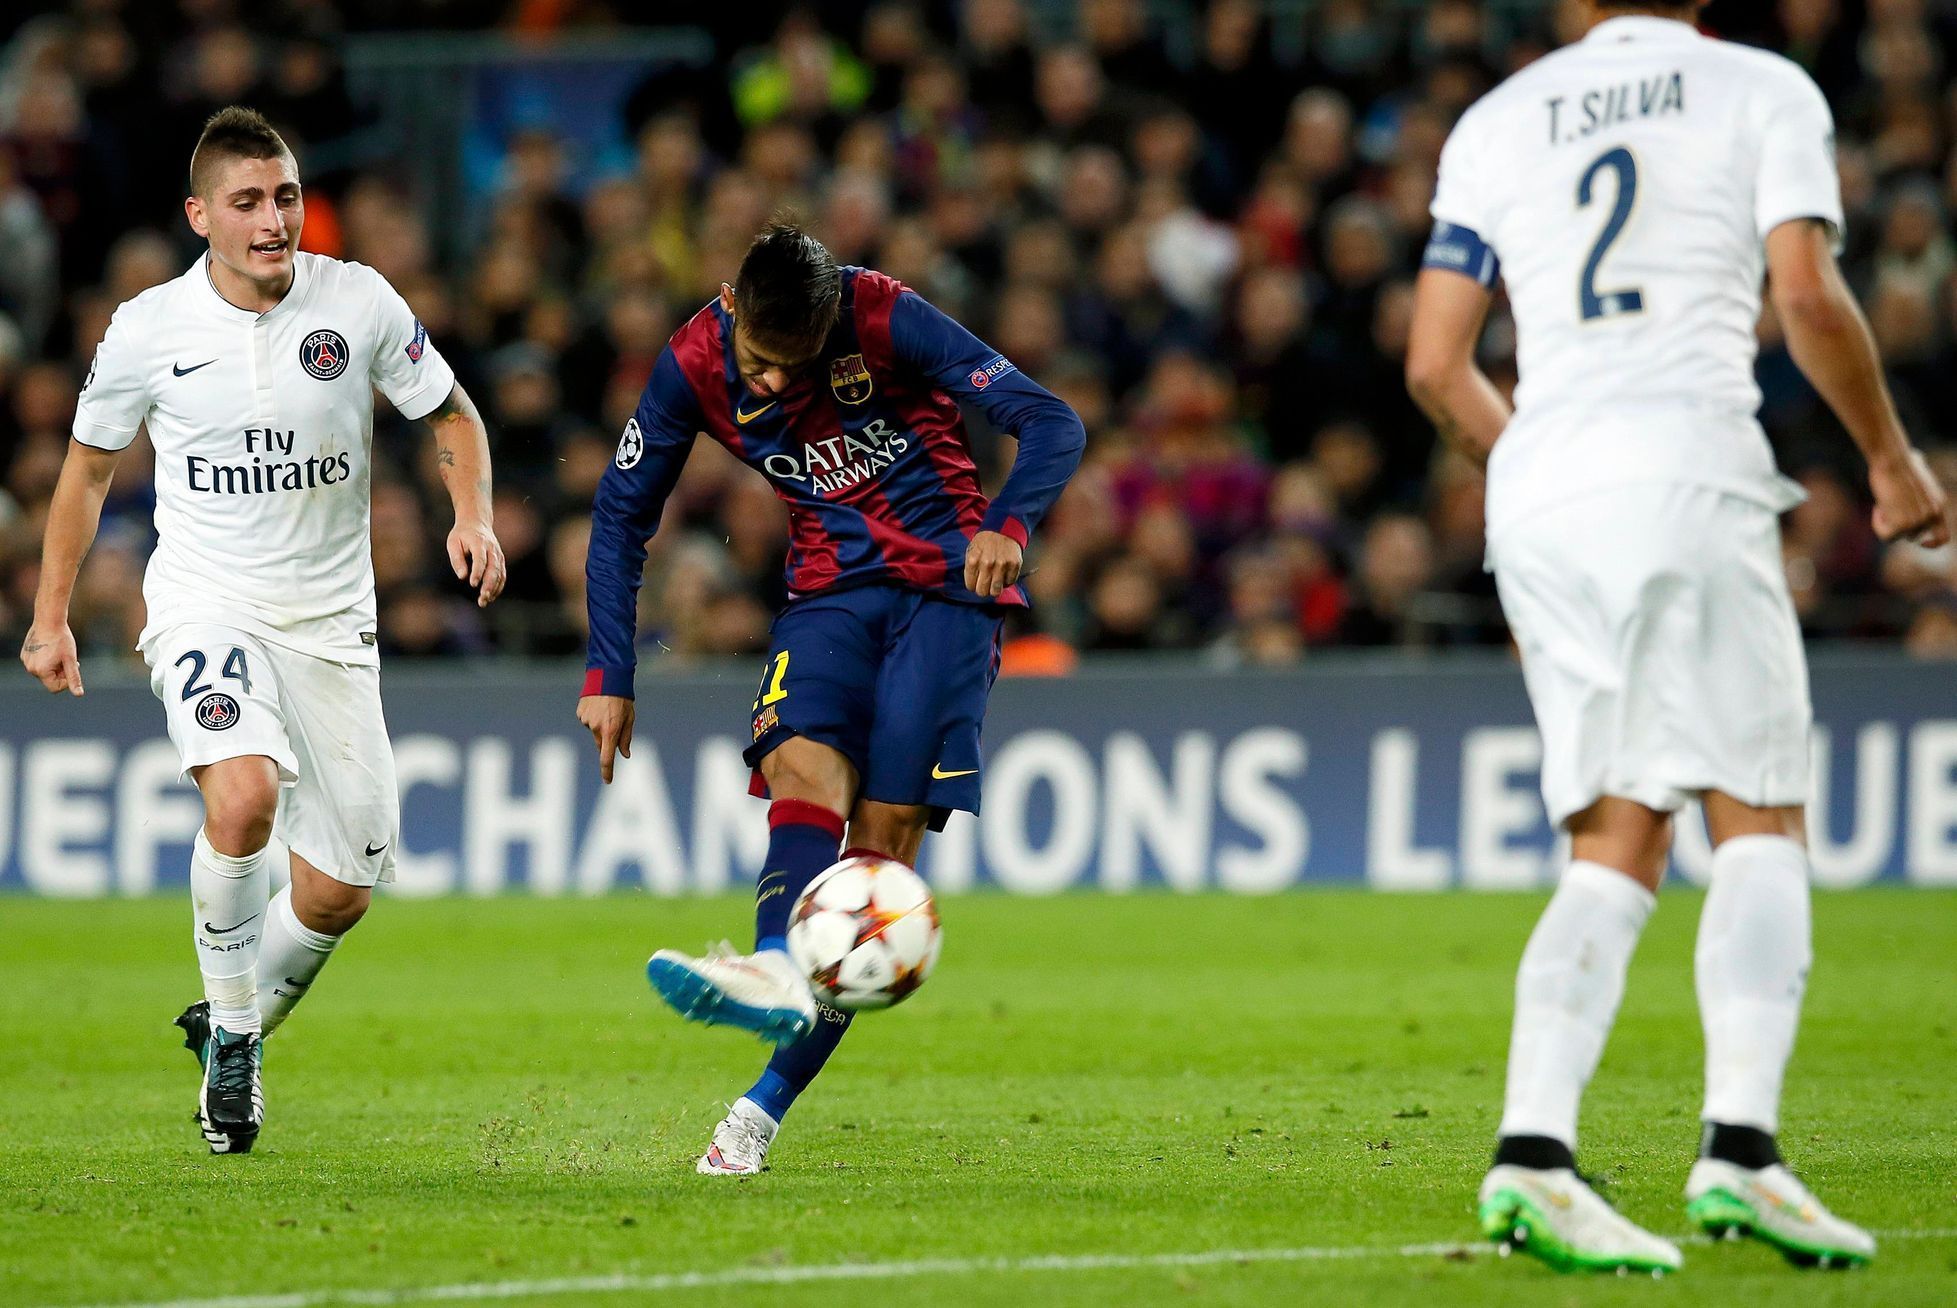 Barcelona's Neymar kicks to score a goal against Paris St Germain during their Champions League Group F soccer match at the Nou Camp stadium in Barcelona